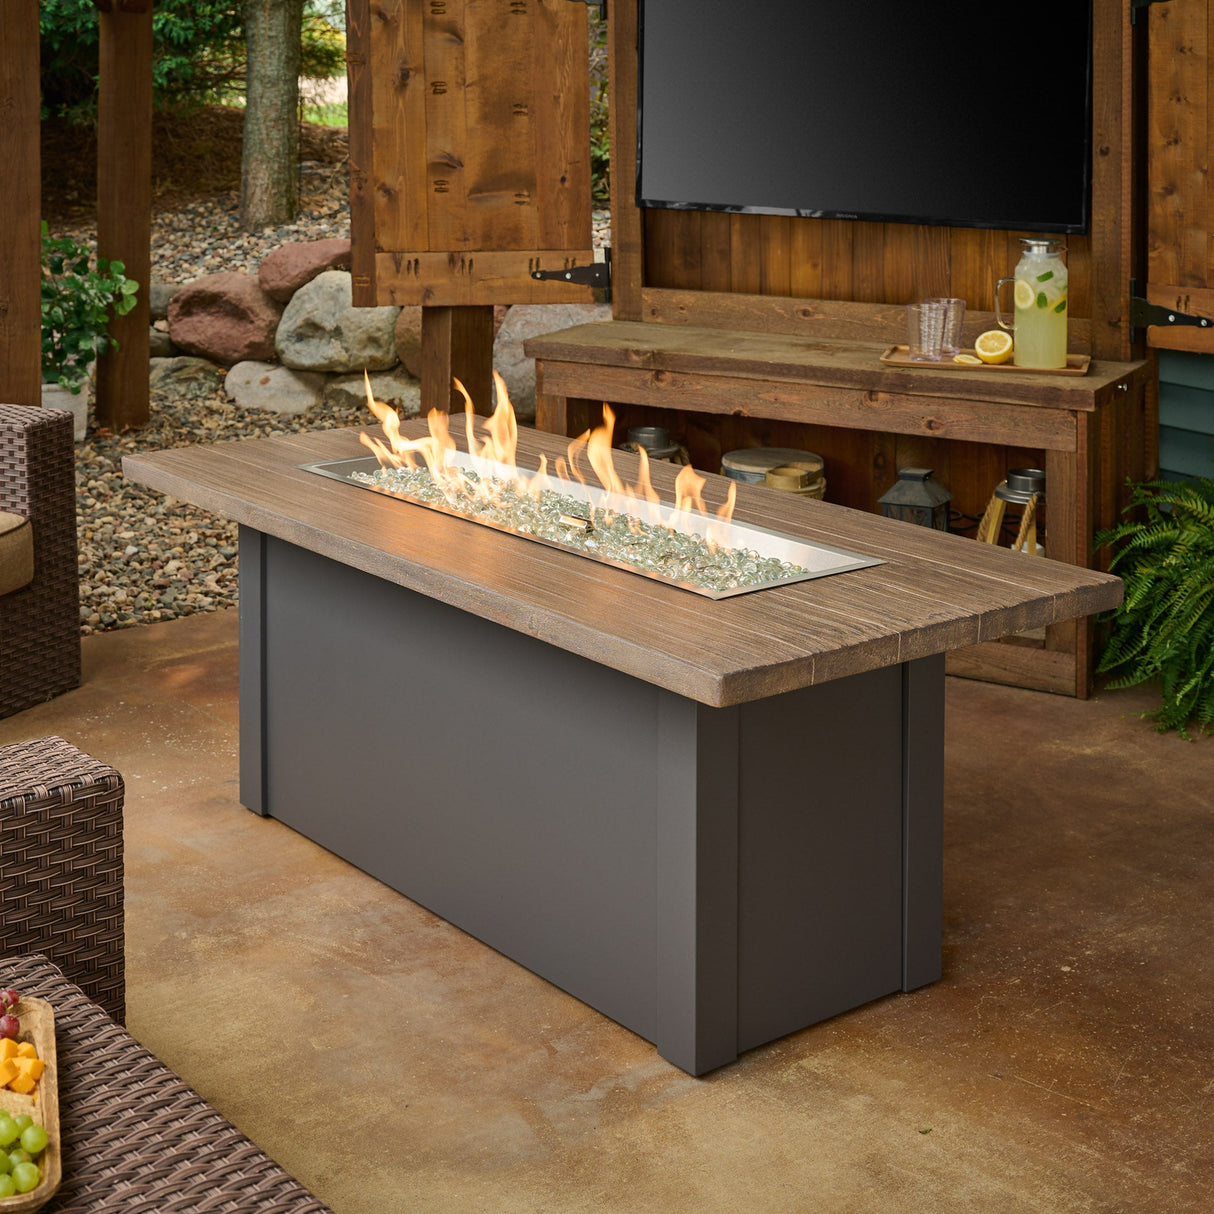 The Havenwood Linear Gas Fire Pit Table with a Driftwood top and Graphite Grey base in a scenic patio setting